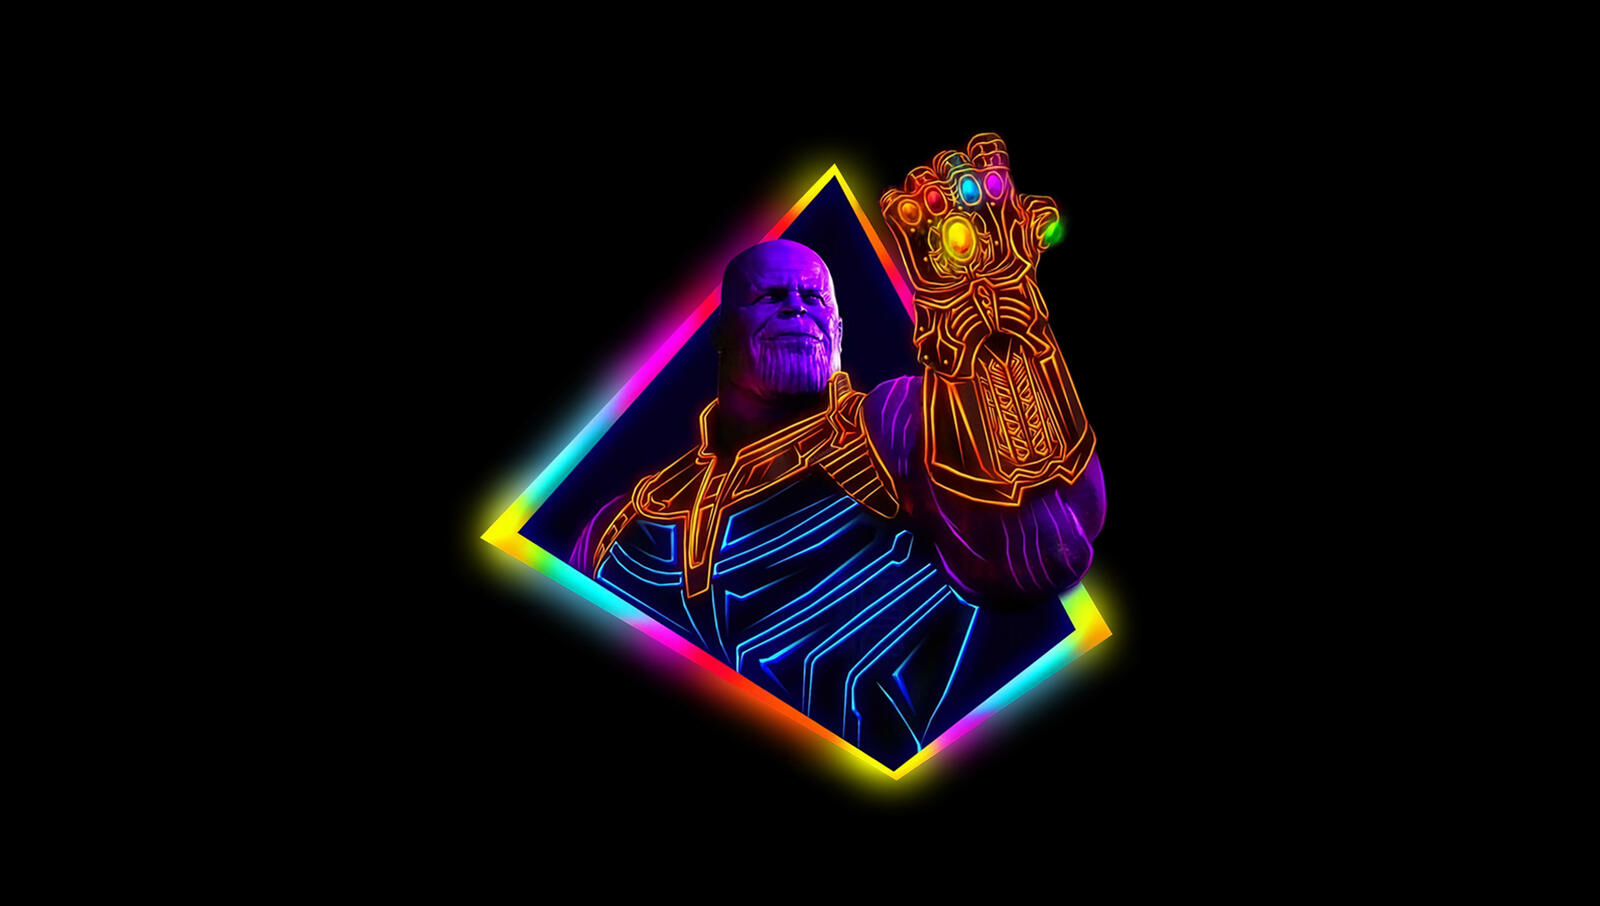 Free photo Thanos from the Avengers movie